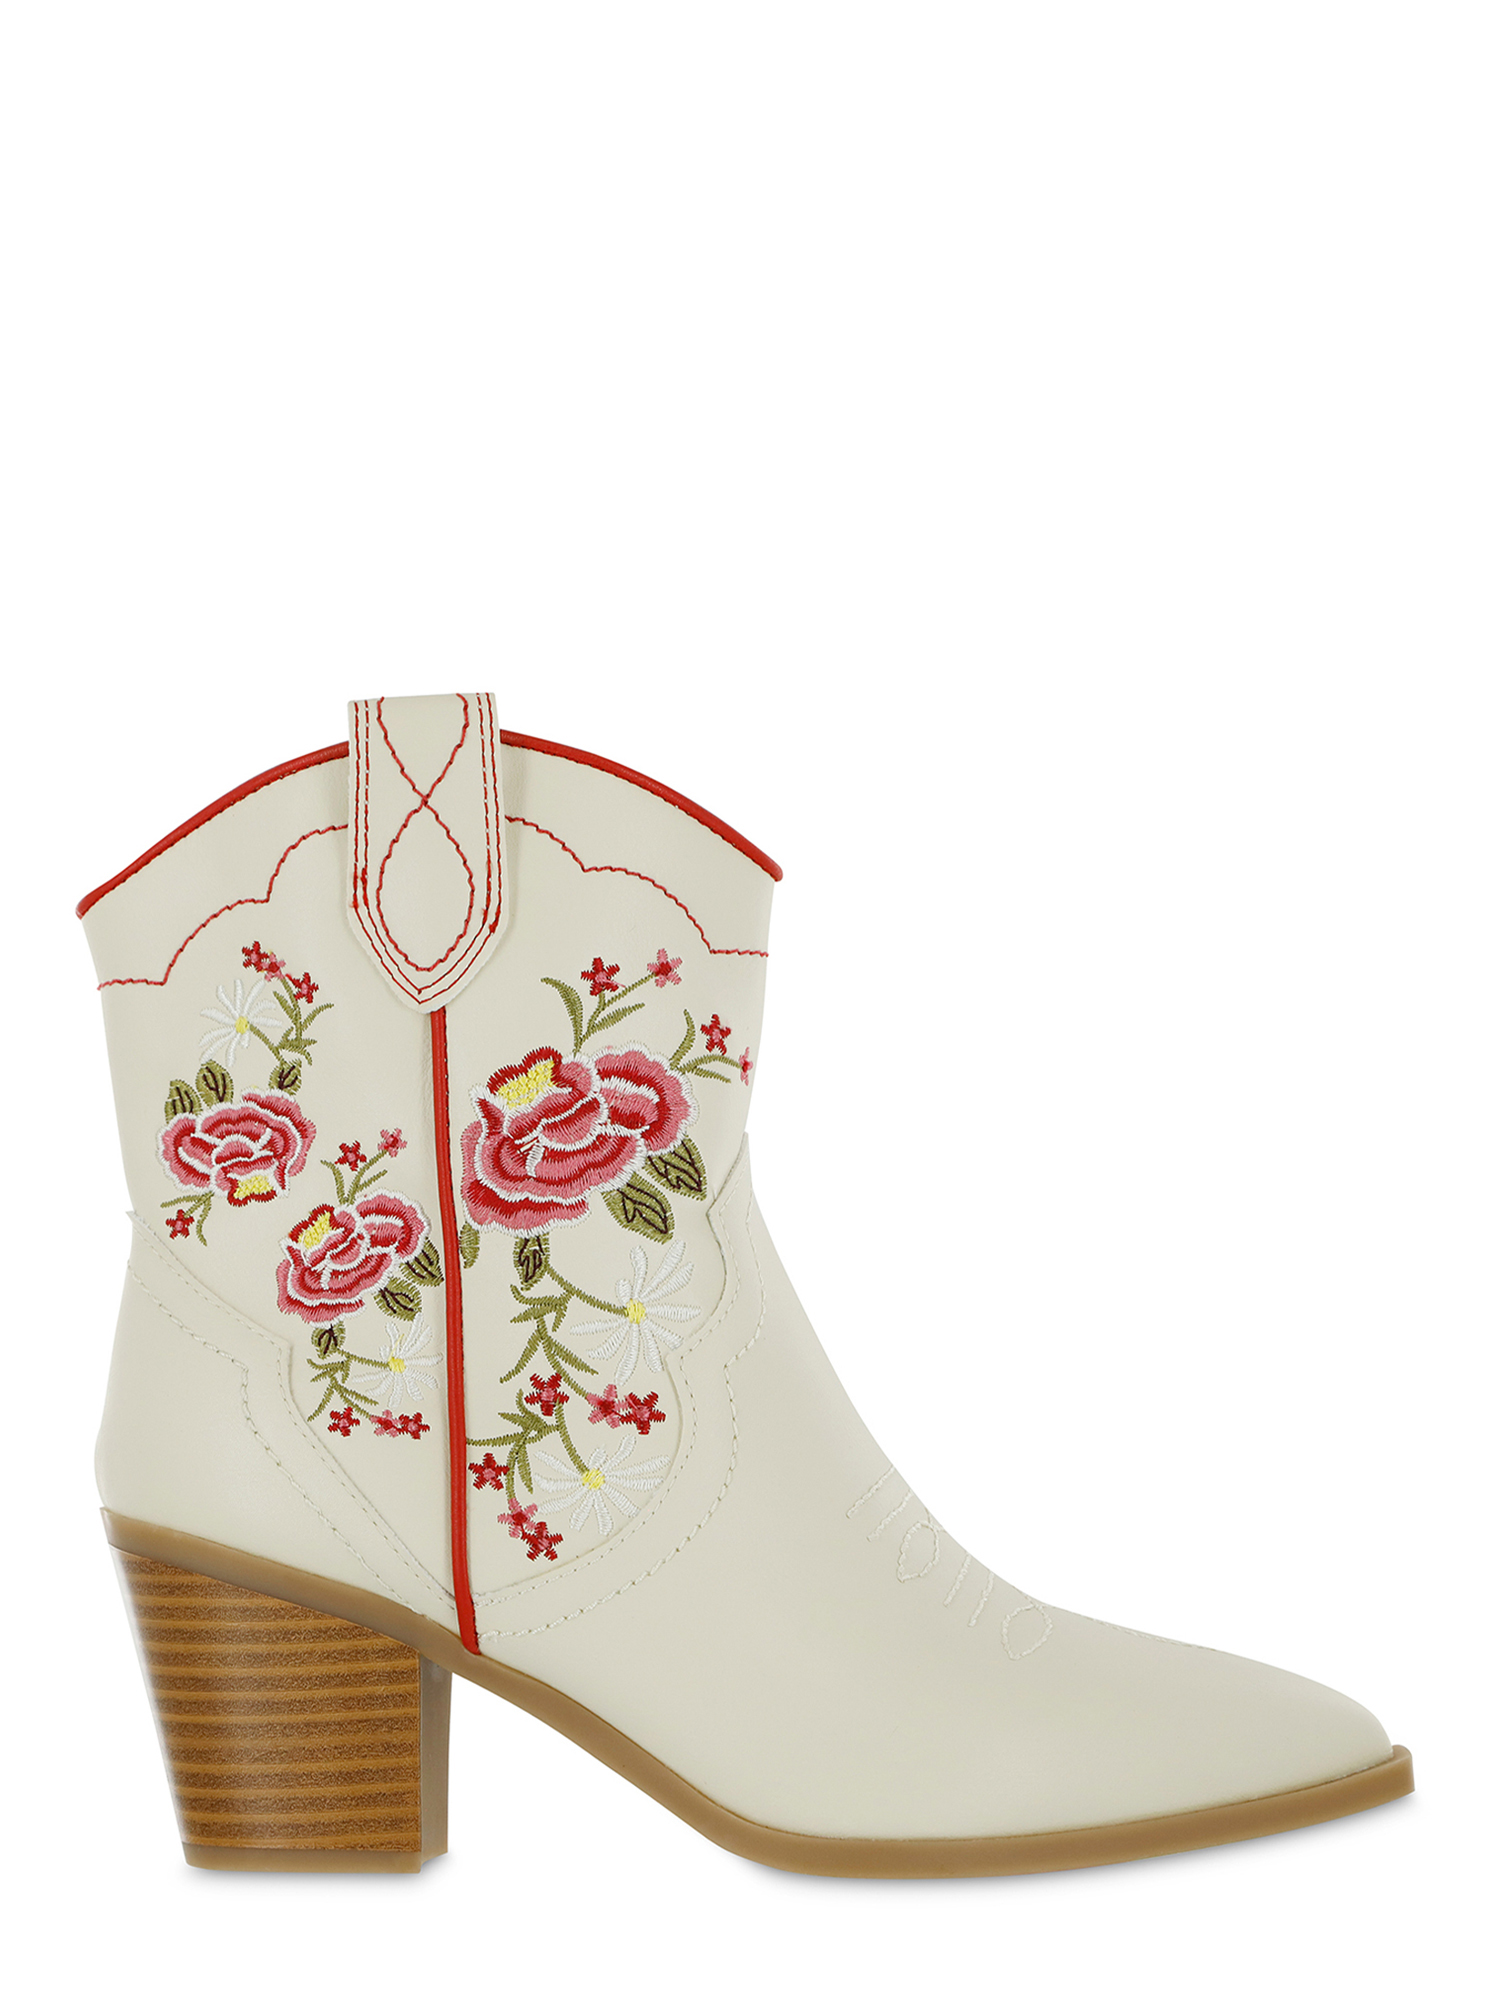 The Pioneer Woman Mommy and Me Embroidered Western Ankle Boot, Women's - image 3 of 7